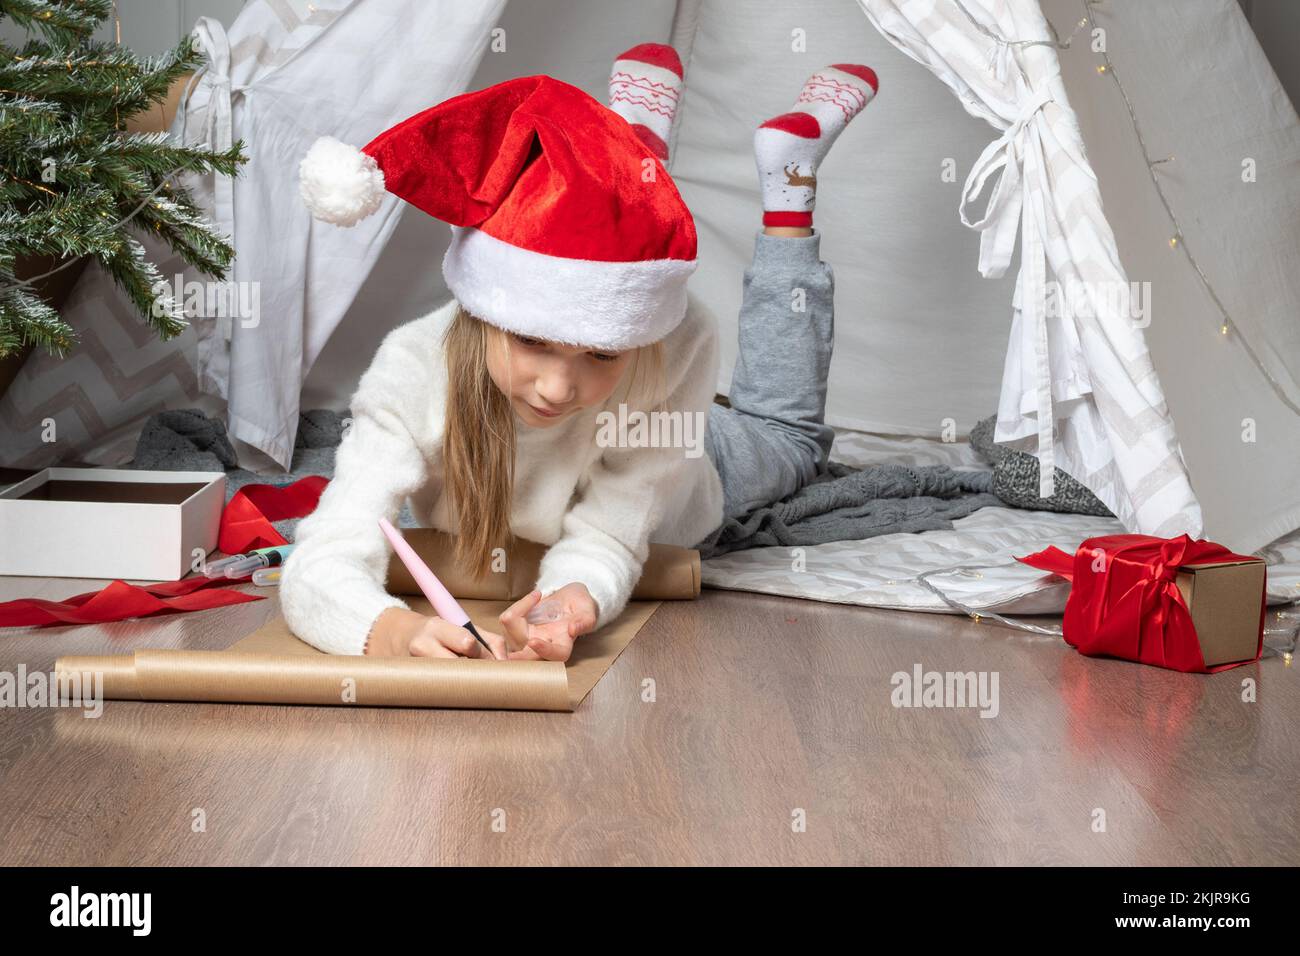 Christmas miracle wish list. Christmas helper child writing letter to Santa Claus in red hat. smiling girl making wish list or letter to santa at home Stock Photo